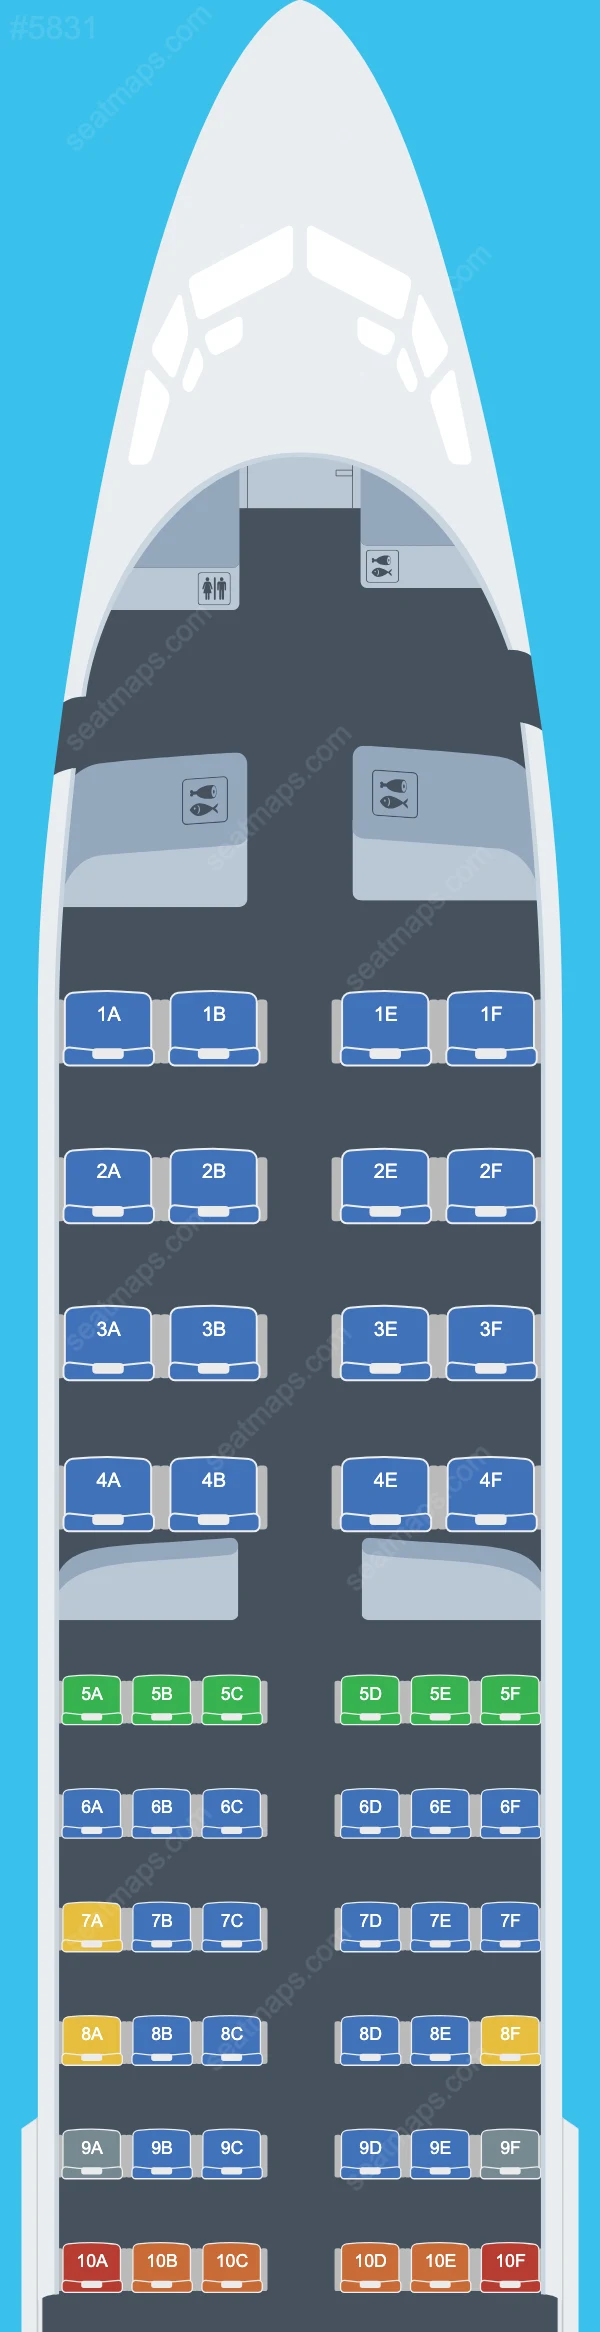 Turkish Airlines Boeing 737 Seat Maps 737-800 V.1